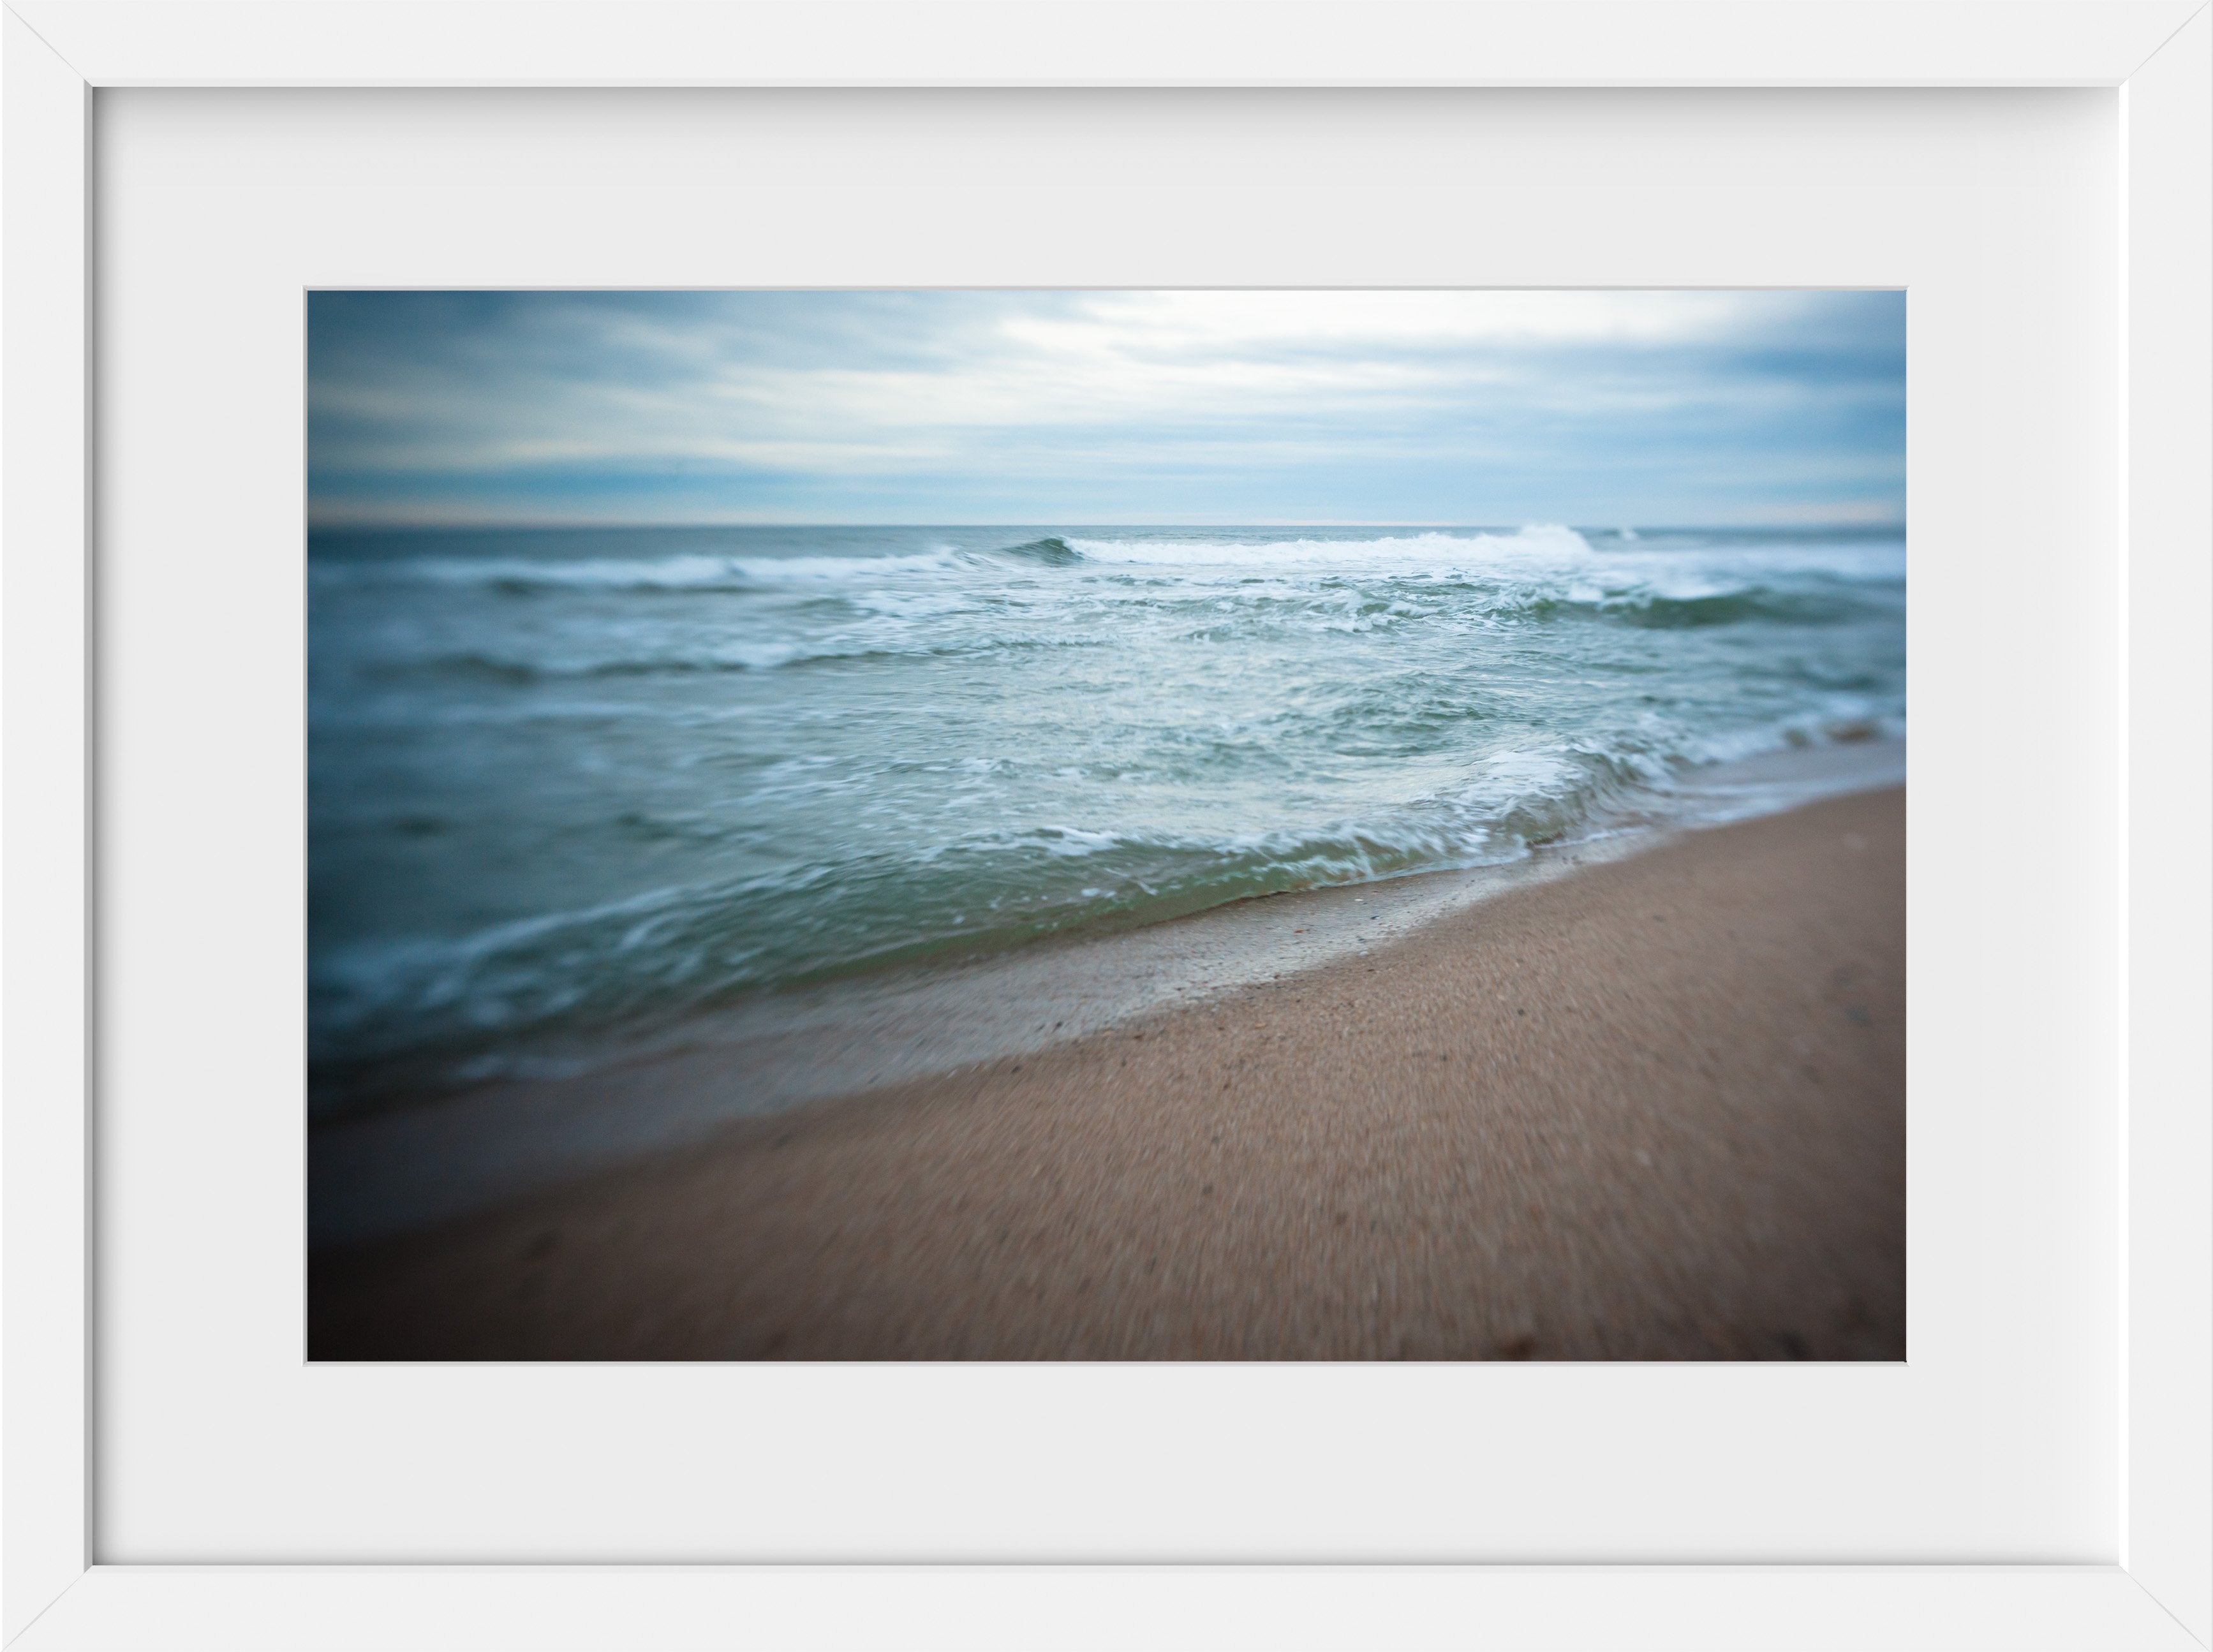 Cate Brown Photo Green Hill in Focus  //  Seascape Photography Made to Order Ocean Fine Art